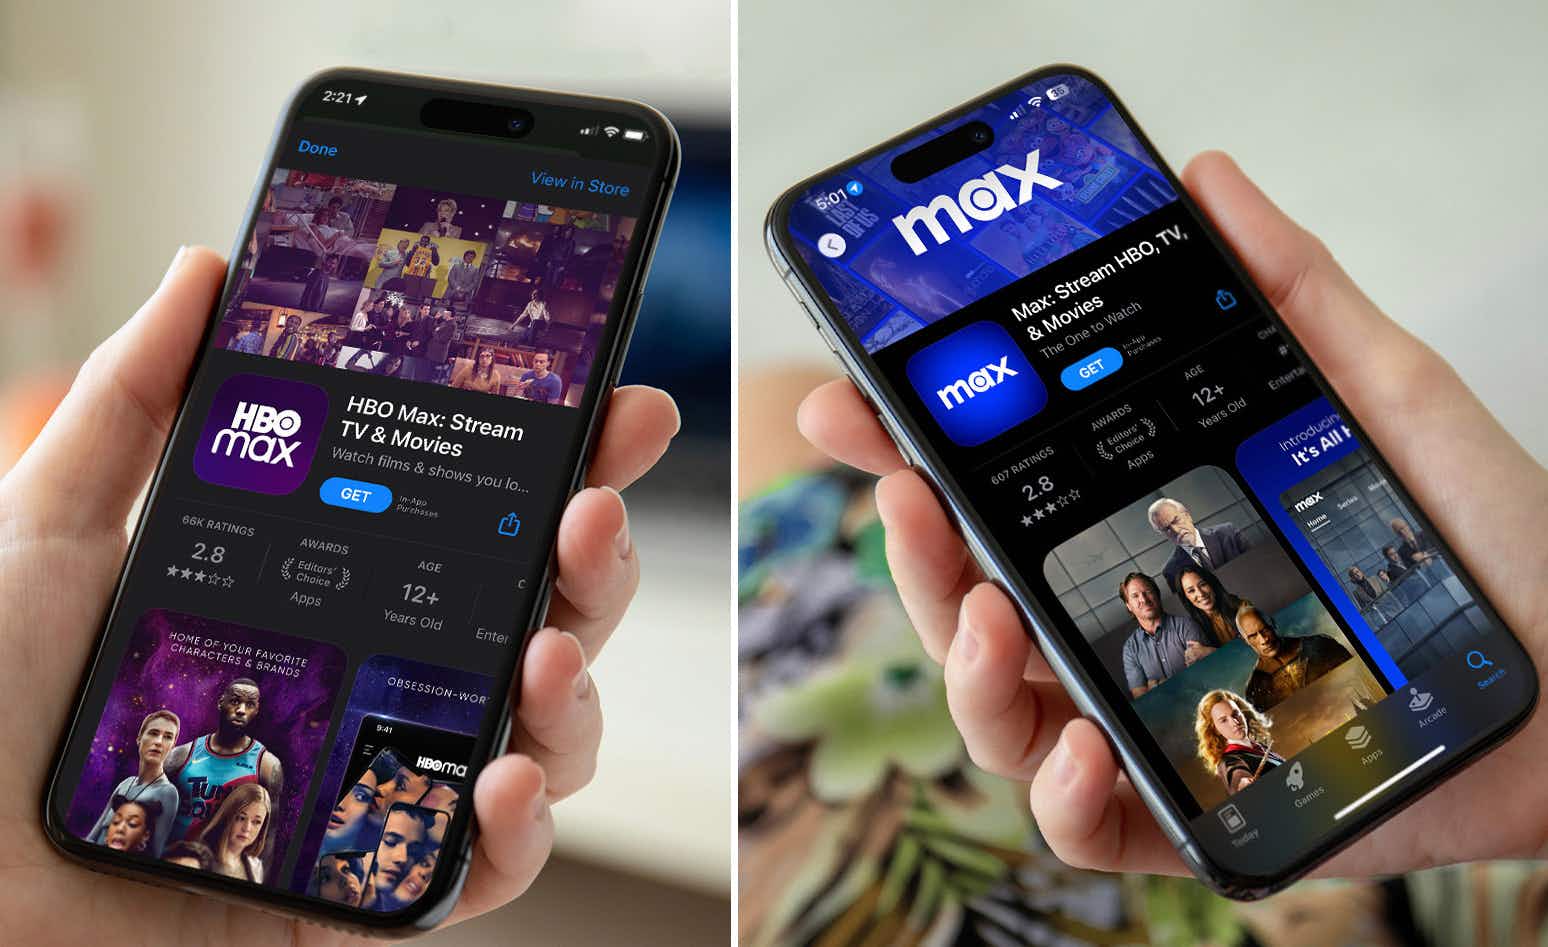 Two phones being compared, one showing the HBO Max app store page and the other showing the new app: Max 